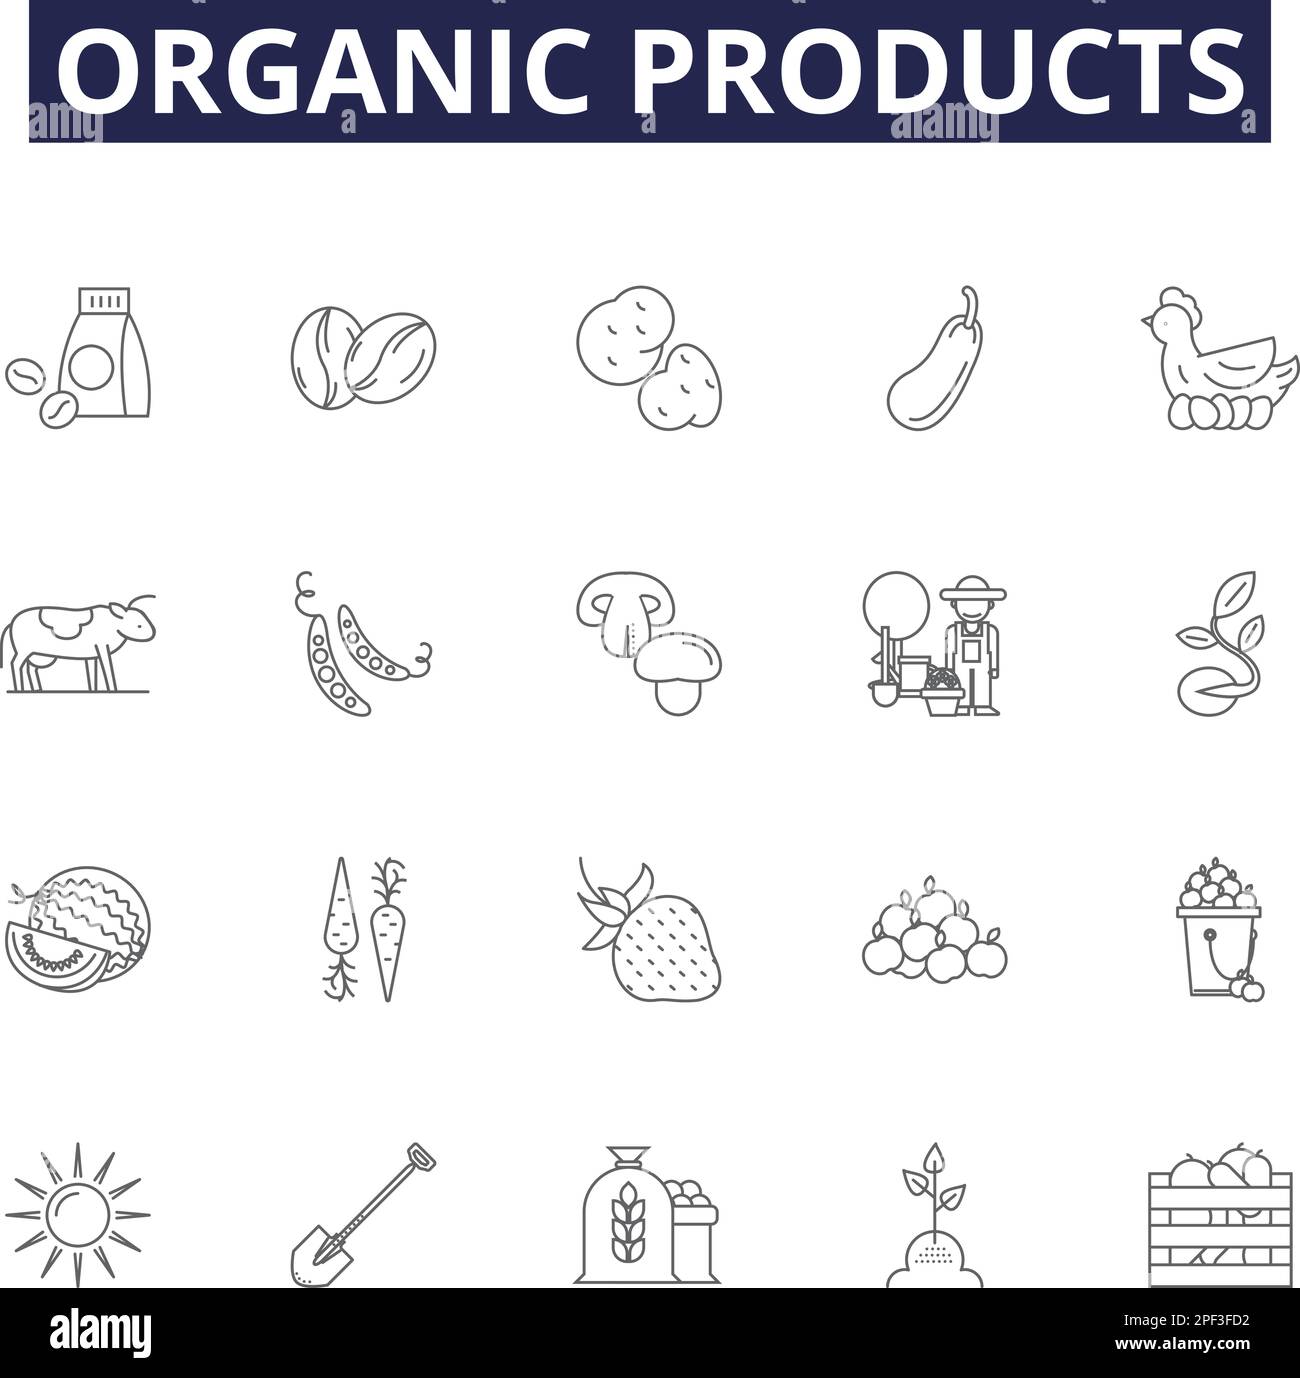 Organic products line vector icons and signs. Products, Natural, Pure, Eco, Environmentally-Friendly, Unprocessed, Free-Range, Chemical-Free outline Stock Vector